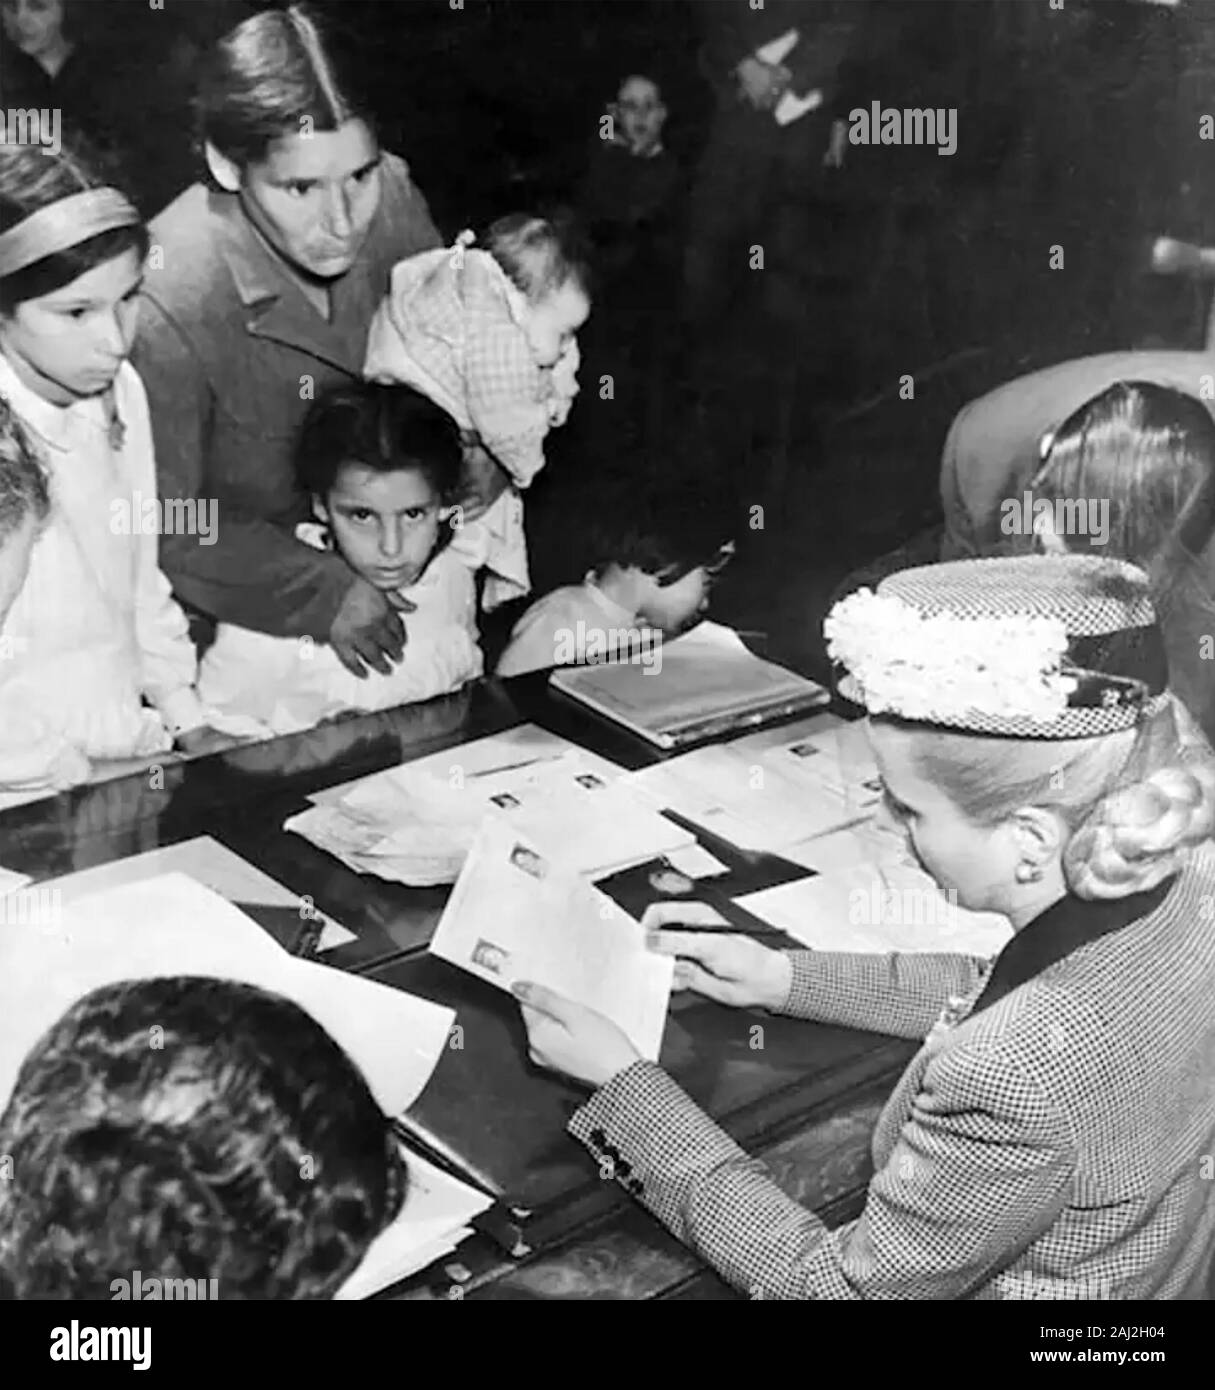 EVITA PERON (1919-1952) as First Lady of Argentina processing applications for help from her Foundation about 1948 Stock Photo